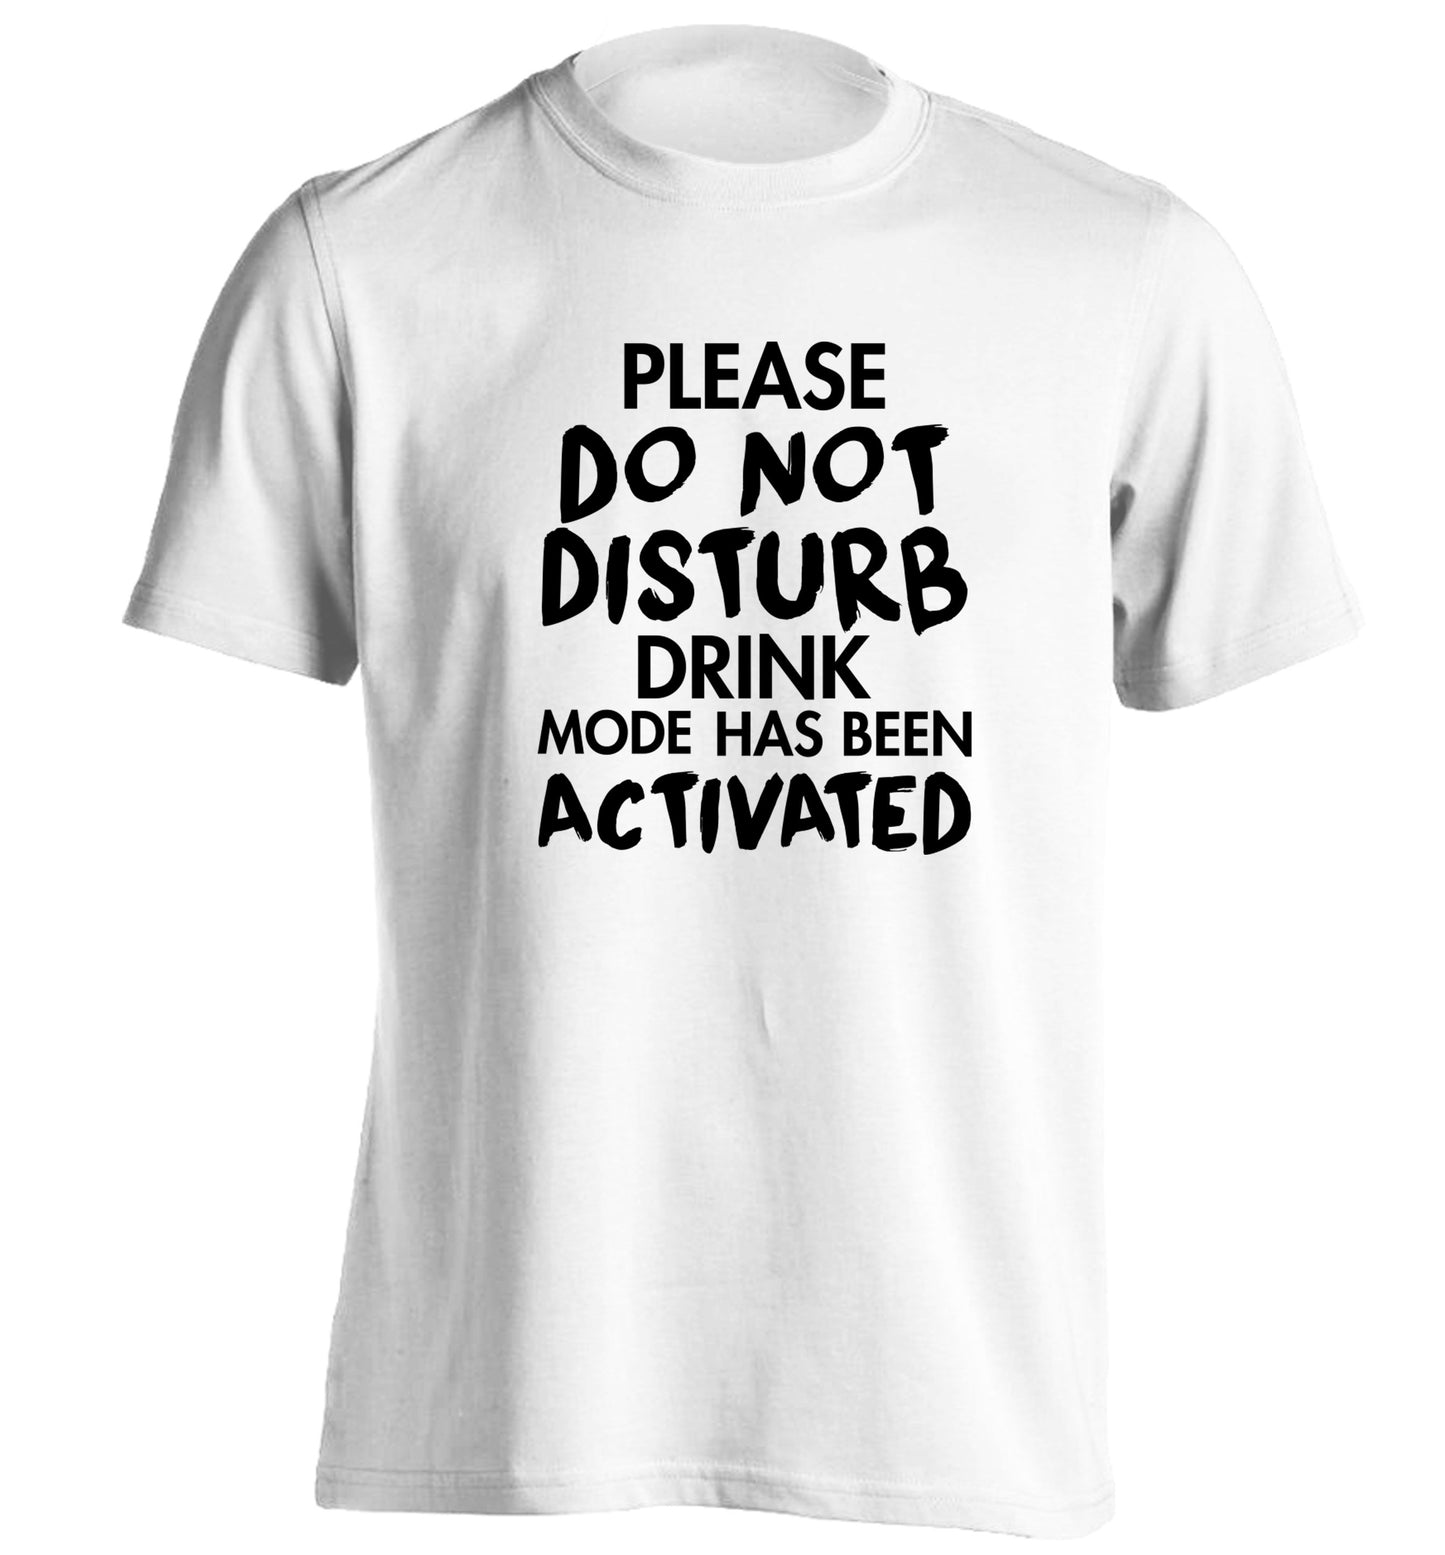 Please do not disturb drink mode has been activated adults unisex white Tshirt 2XL